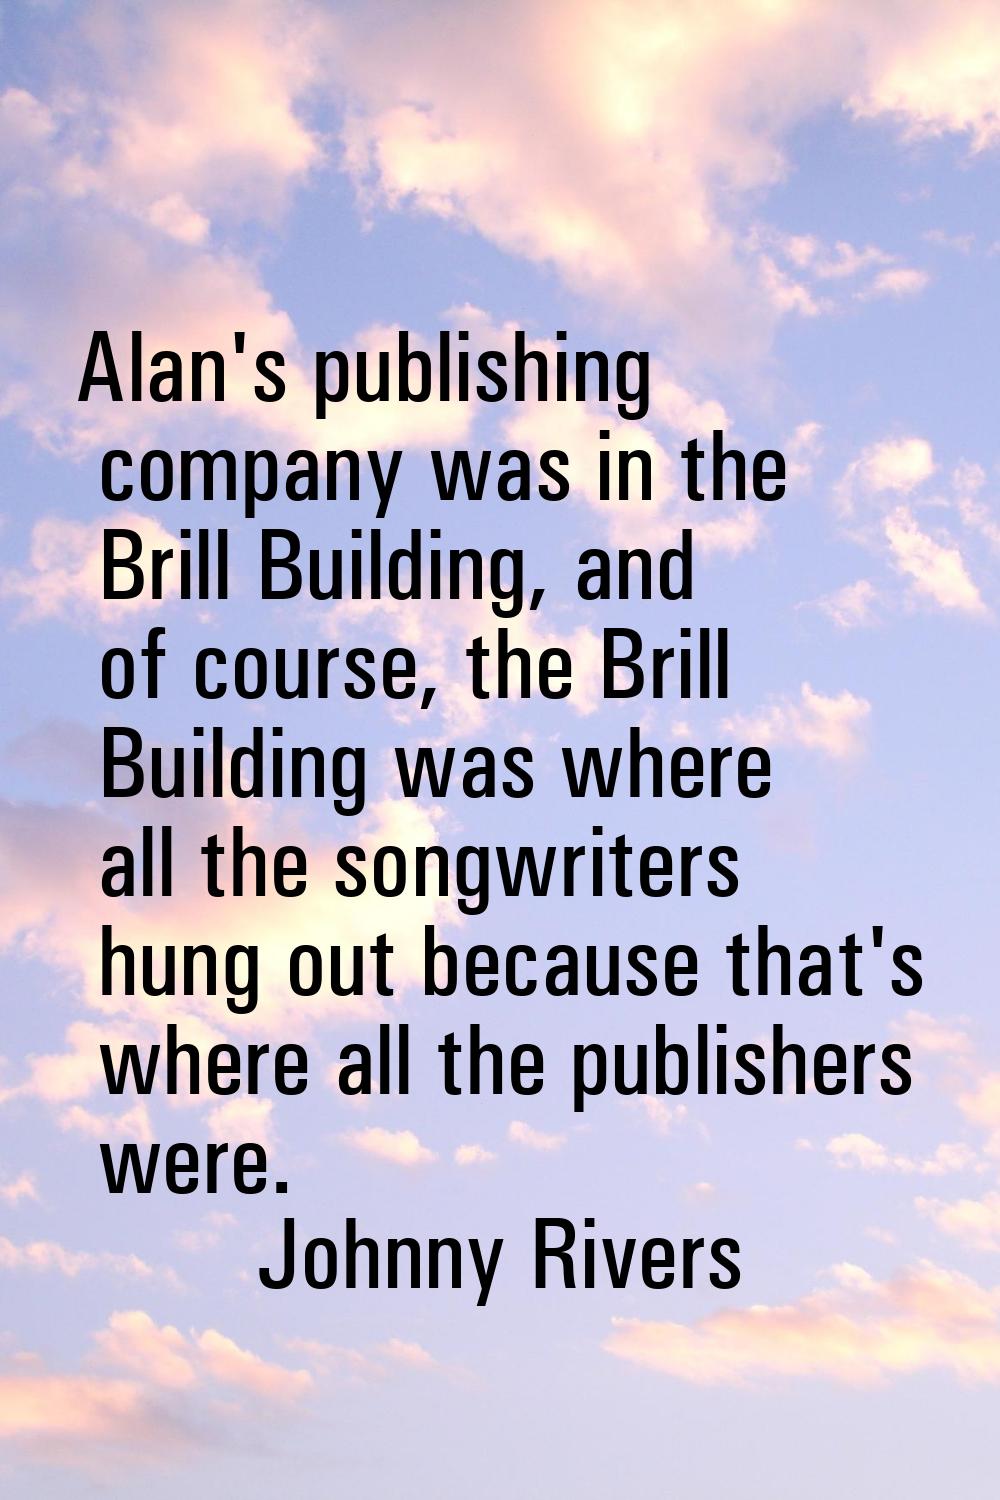 Alan's publishing company was in the Brill Building, and of course, the Brill Building was where al